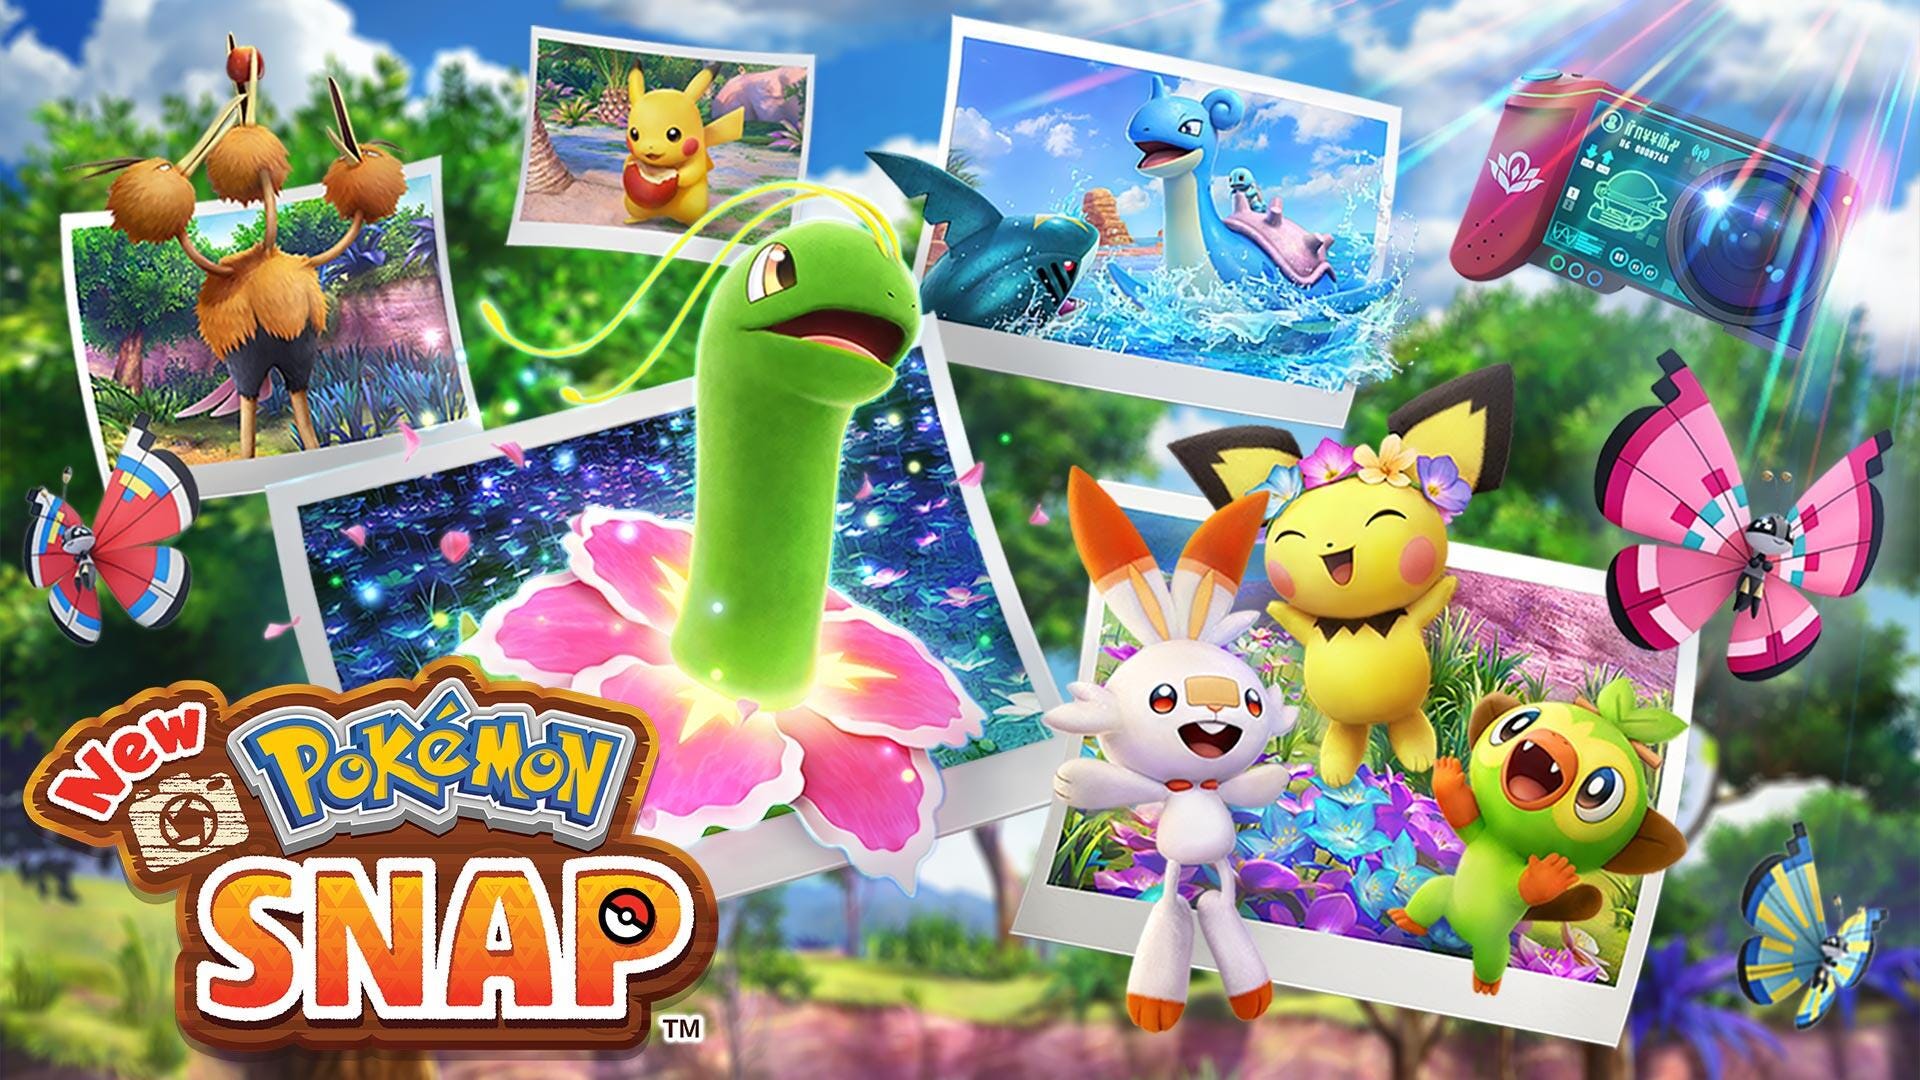 New Pokemon Snap: The most chill Nintendo game since Animal Crossing